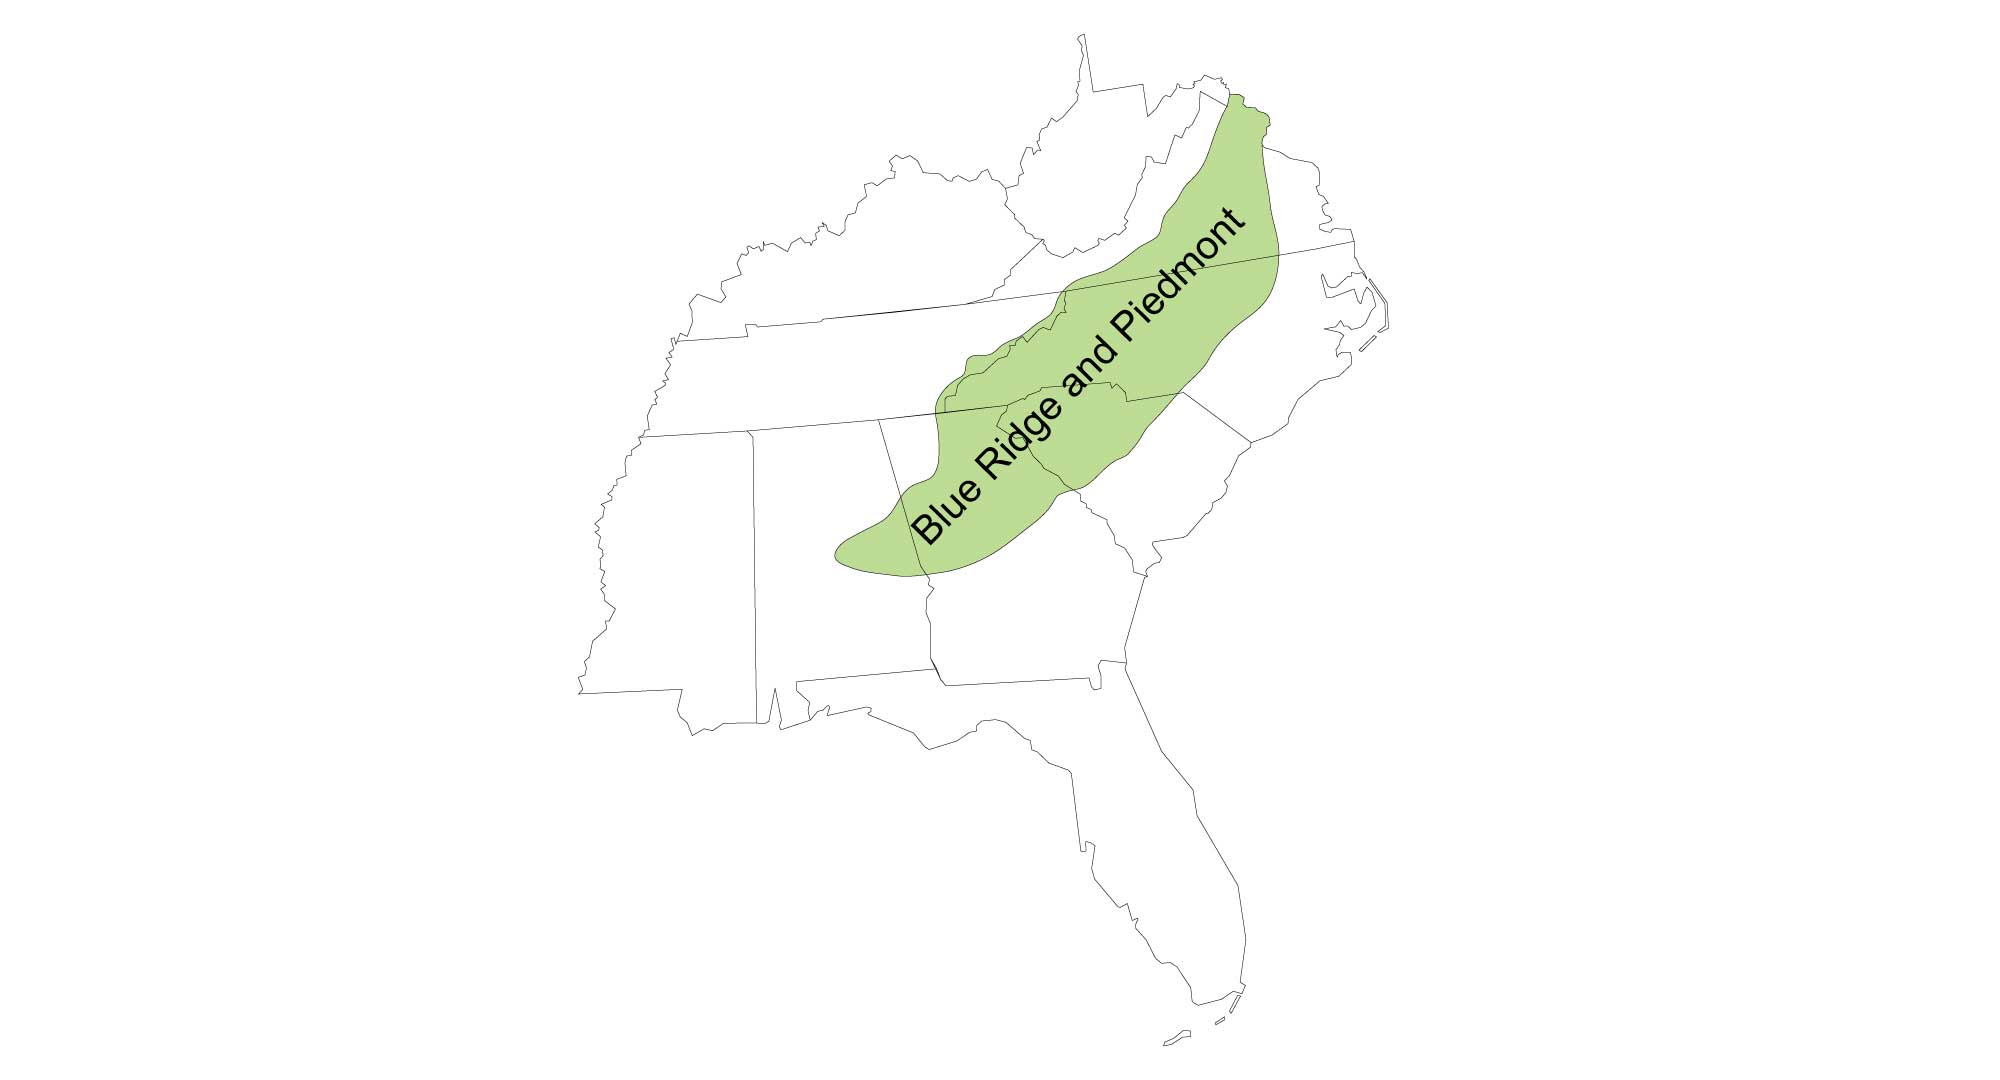 Simple map showing the Blue Ridge and Piedmont region of the southeastern United States.